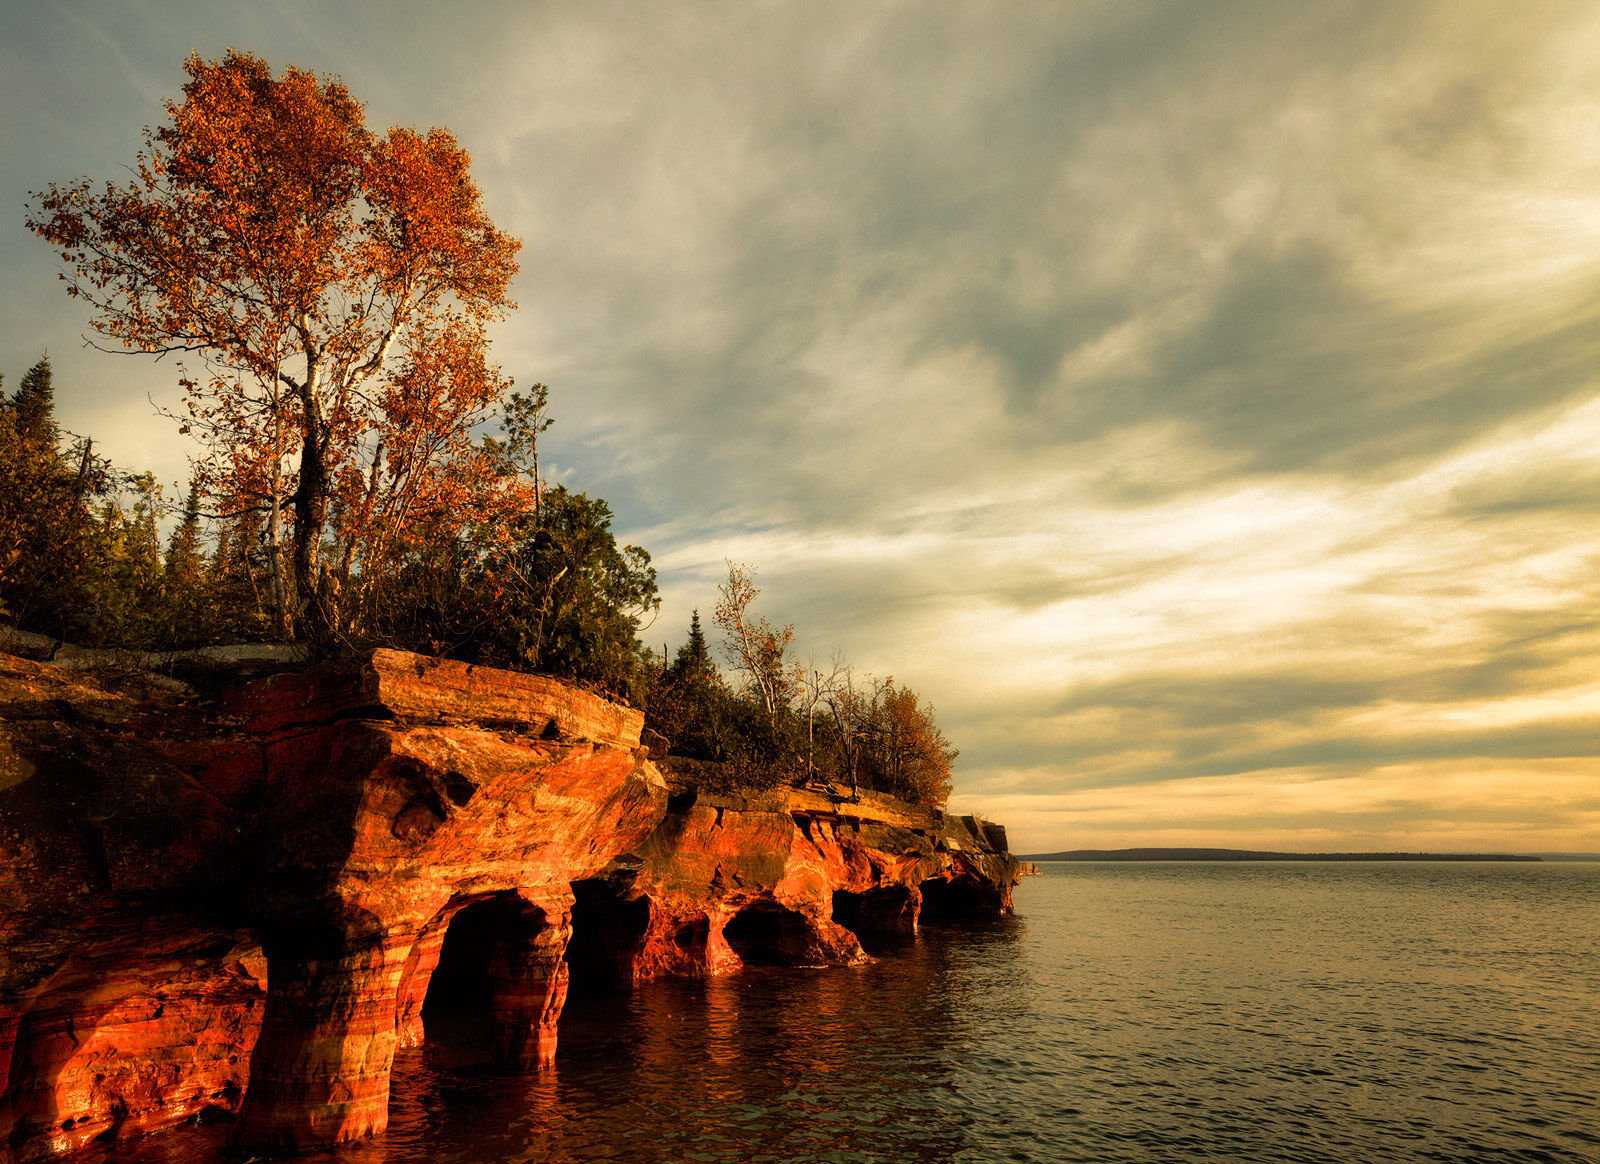 Devil's Island in the apostle island near bayfield wisconsin in October with fall colors 